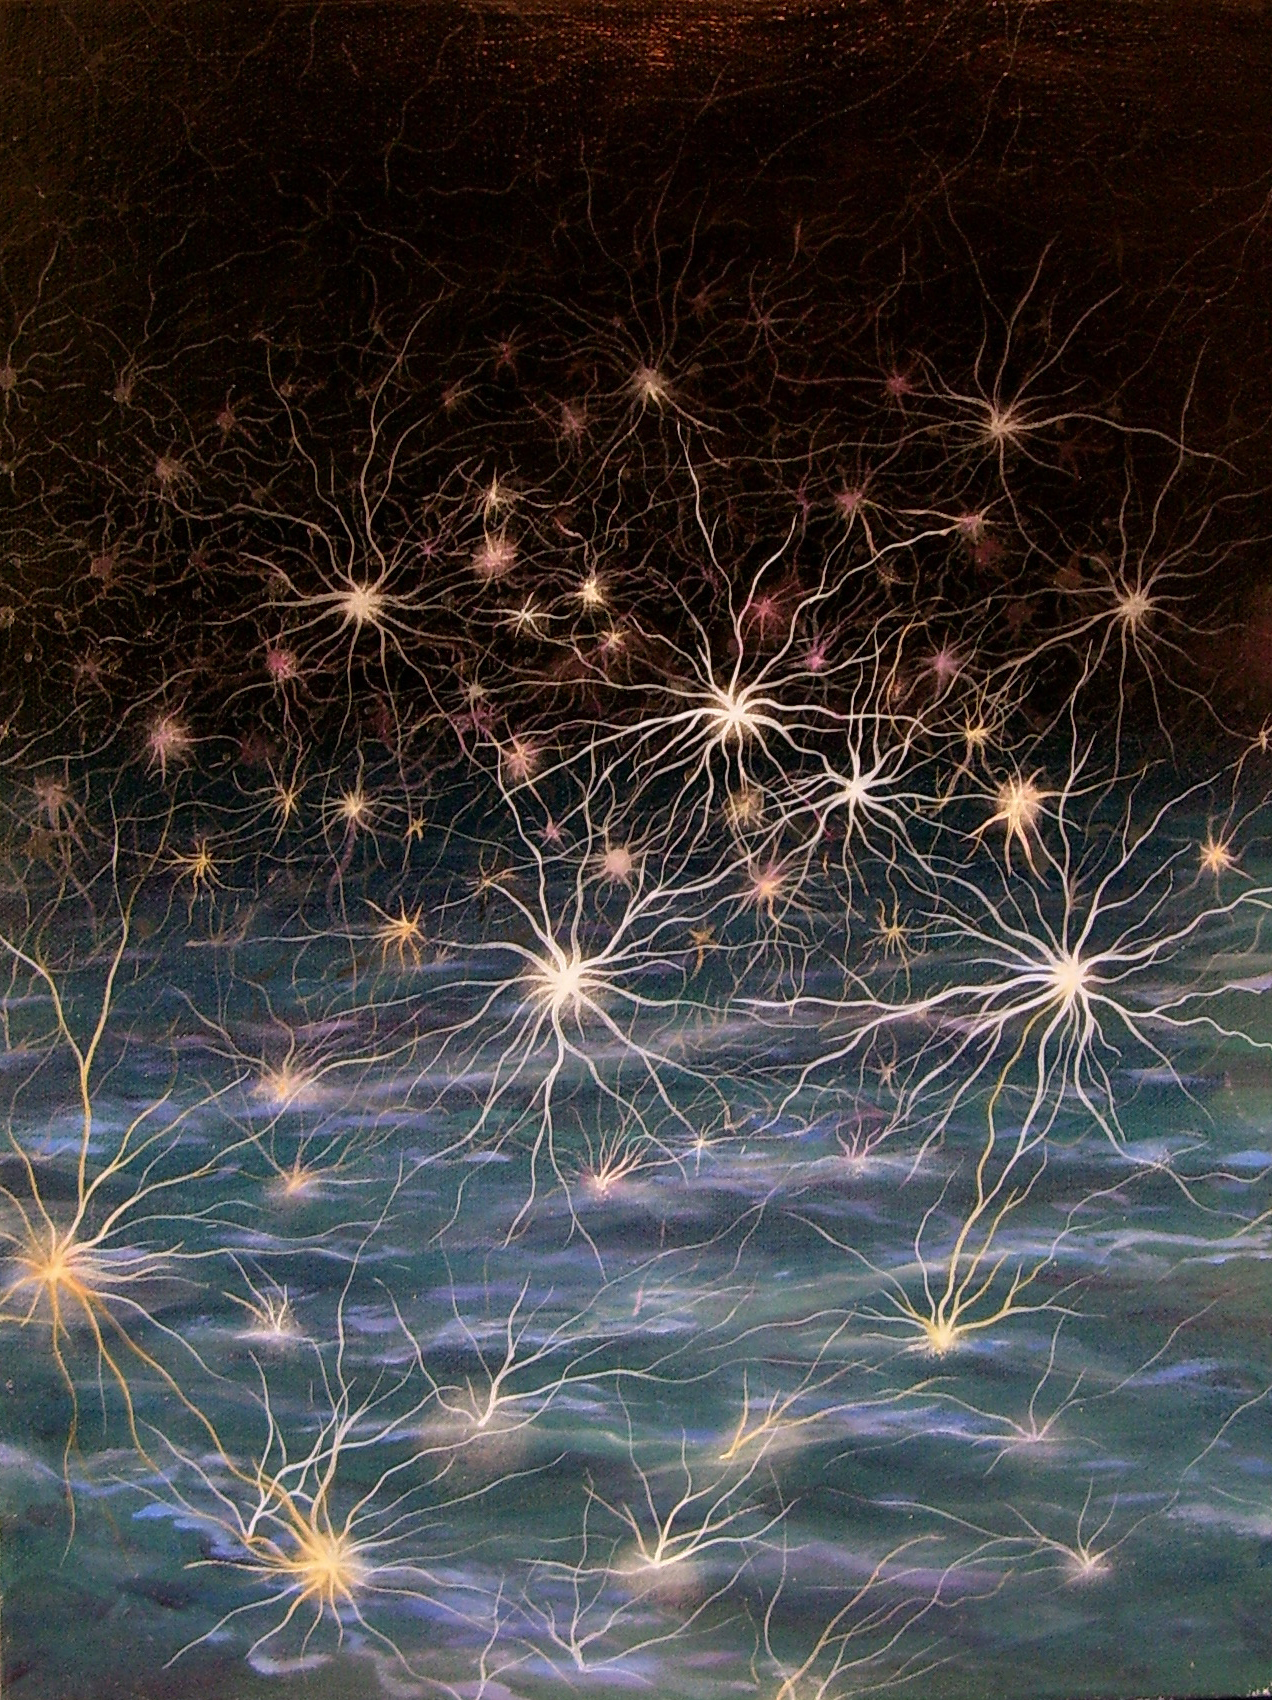  Neurons/ 2007 /oil on canvas/ 16 x 12 inches 